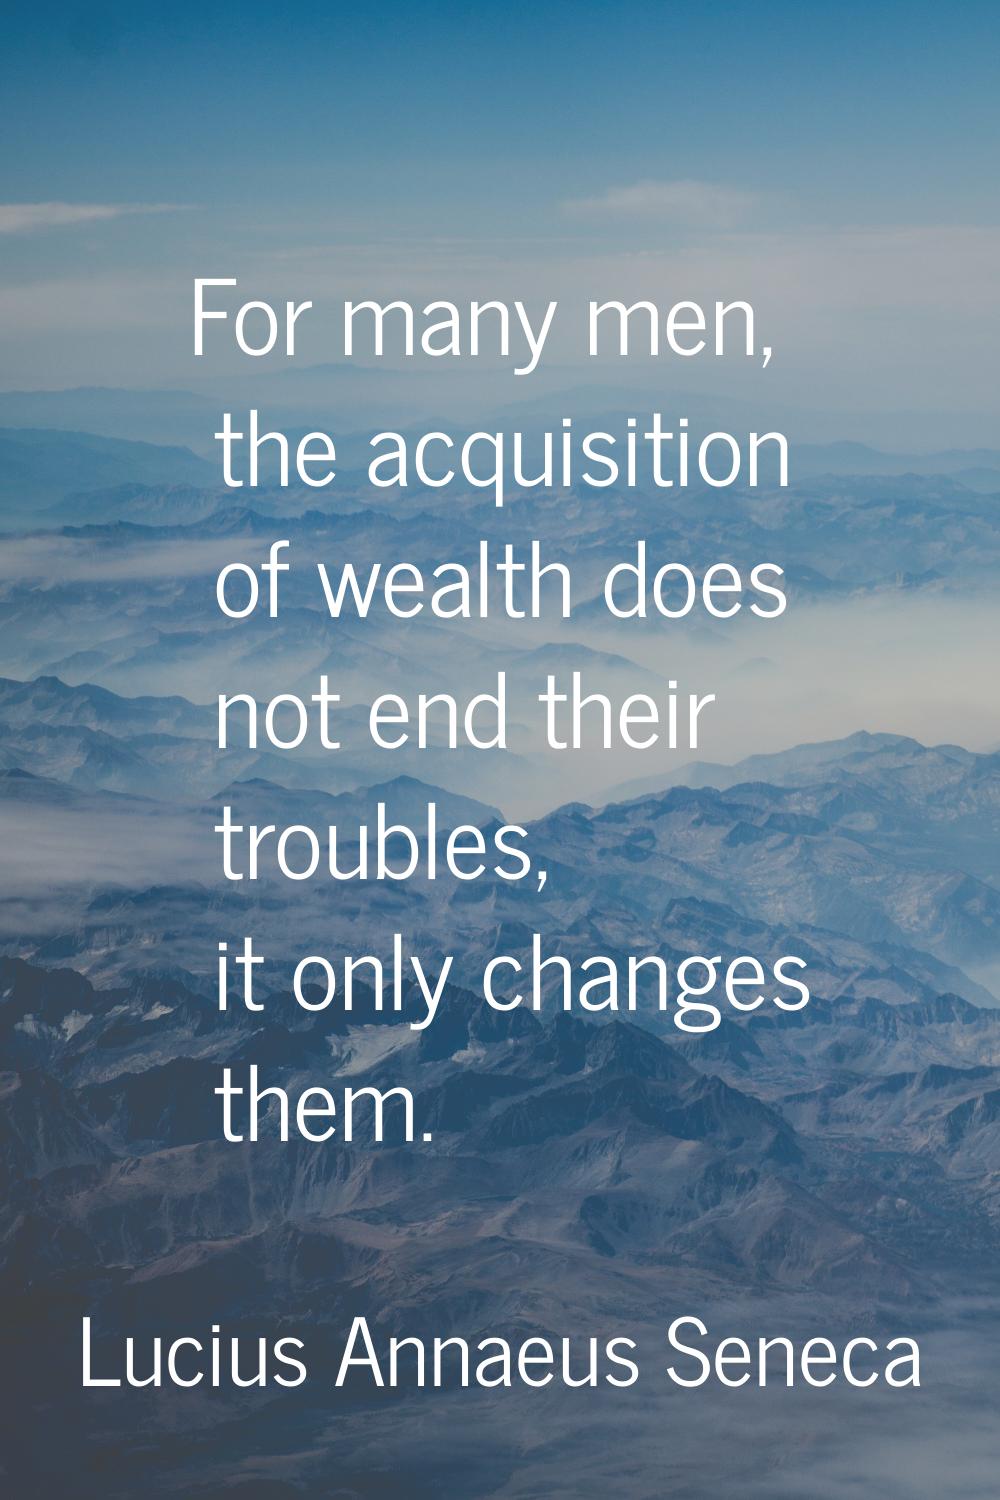 For many men, the acquisition of wealth does not end their troubles, it only changes them.